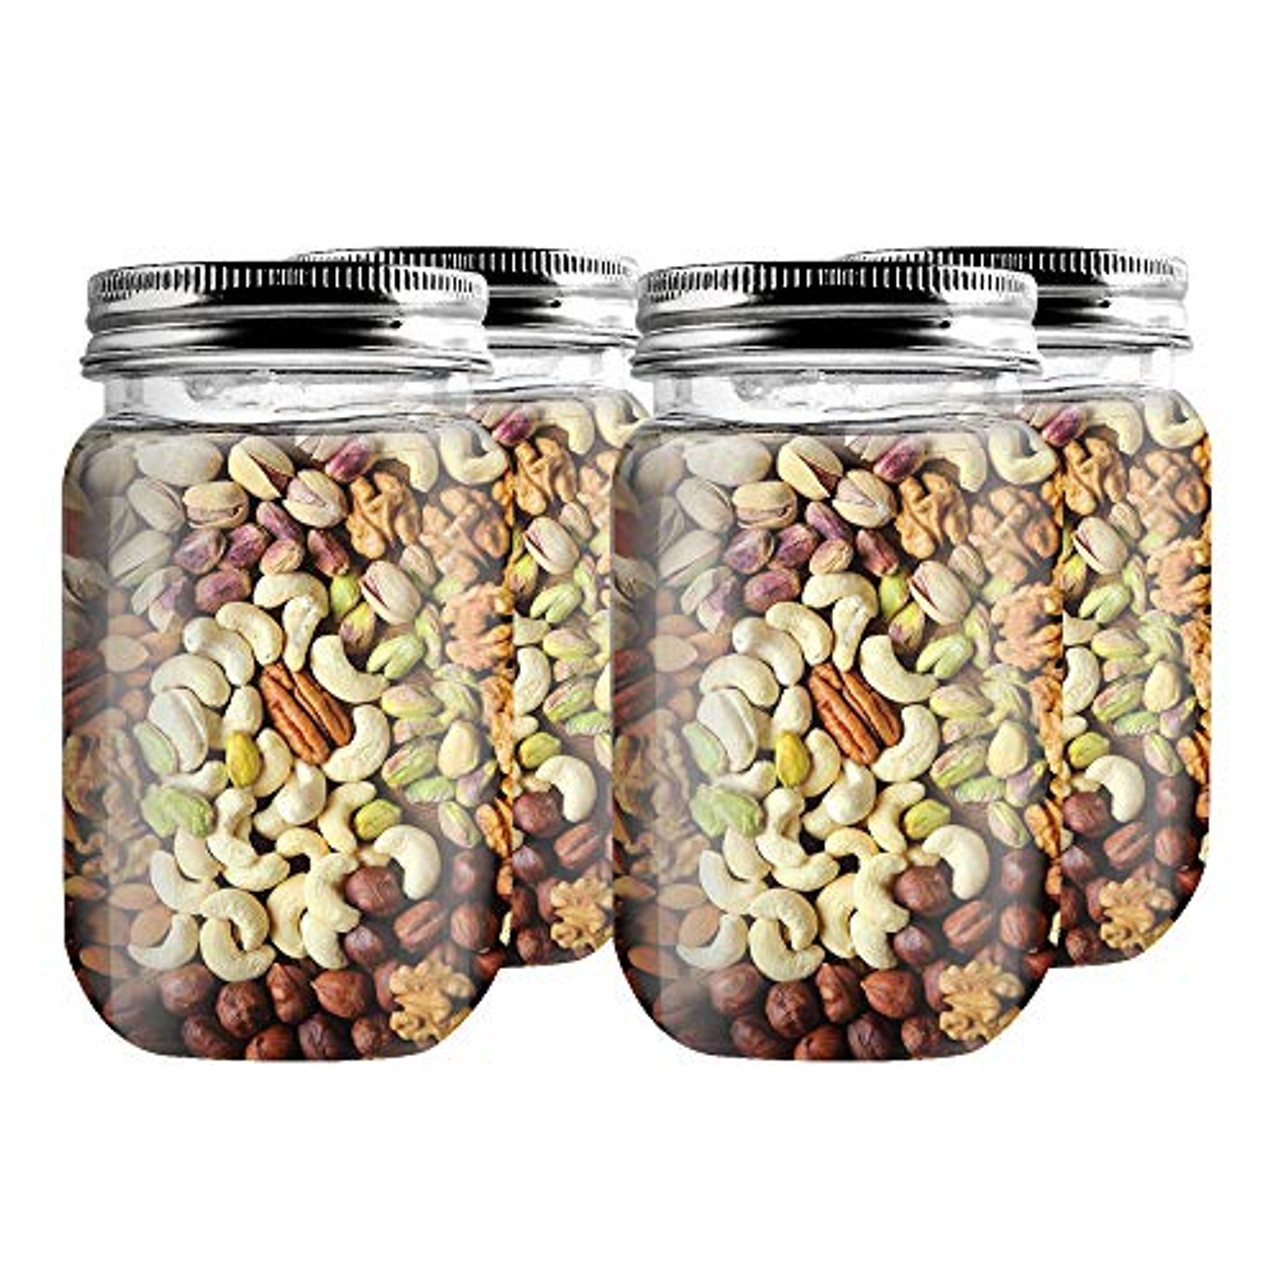 16 Oz Clear Plastic Mason Jars With Ribbed Liner Screw On Lids, Wide Mouth,  ECO, BPA Free, PET Plastic, Made In USA, Bulk Storage Containers, 6 Pack  (16 Ounces)